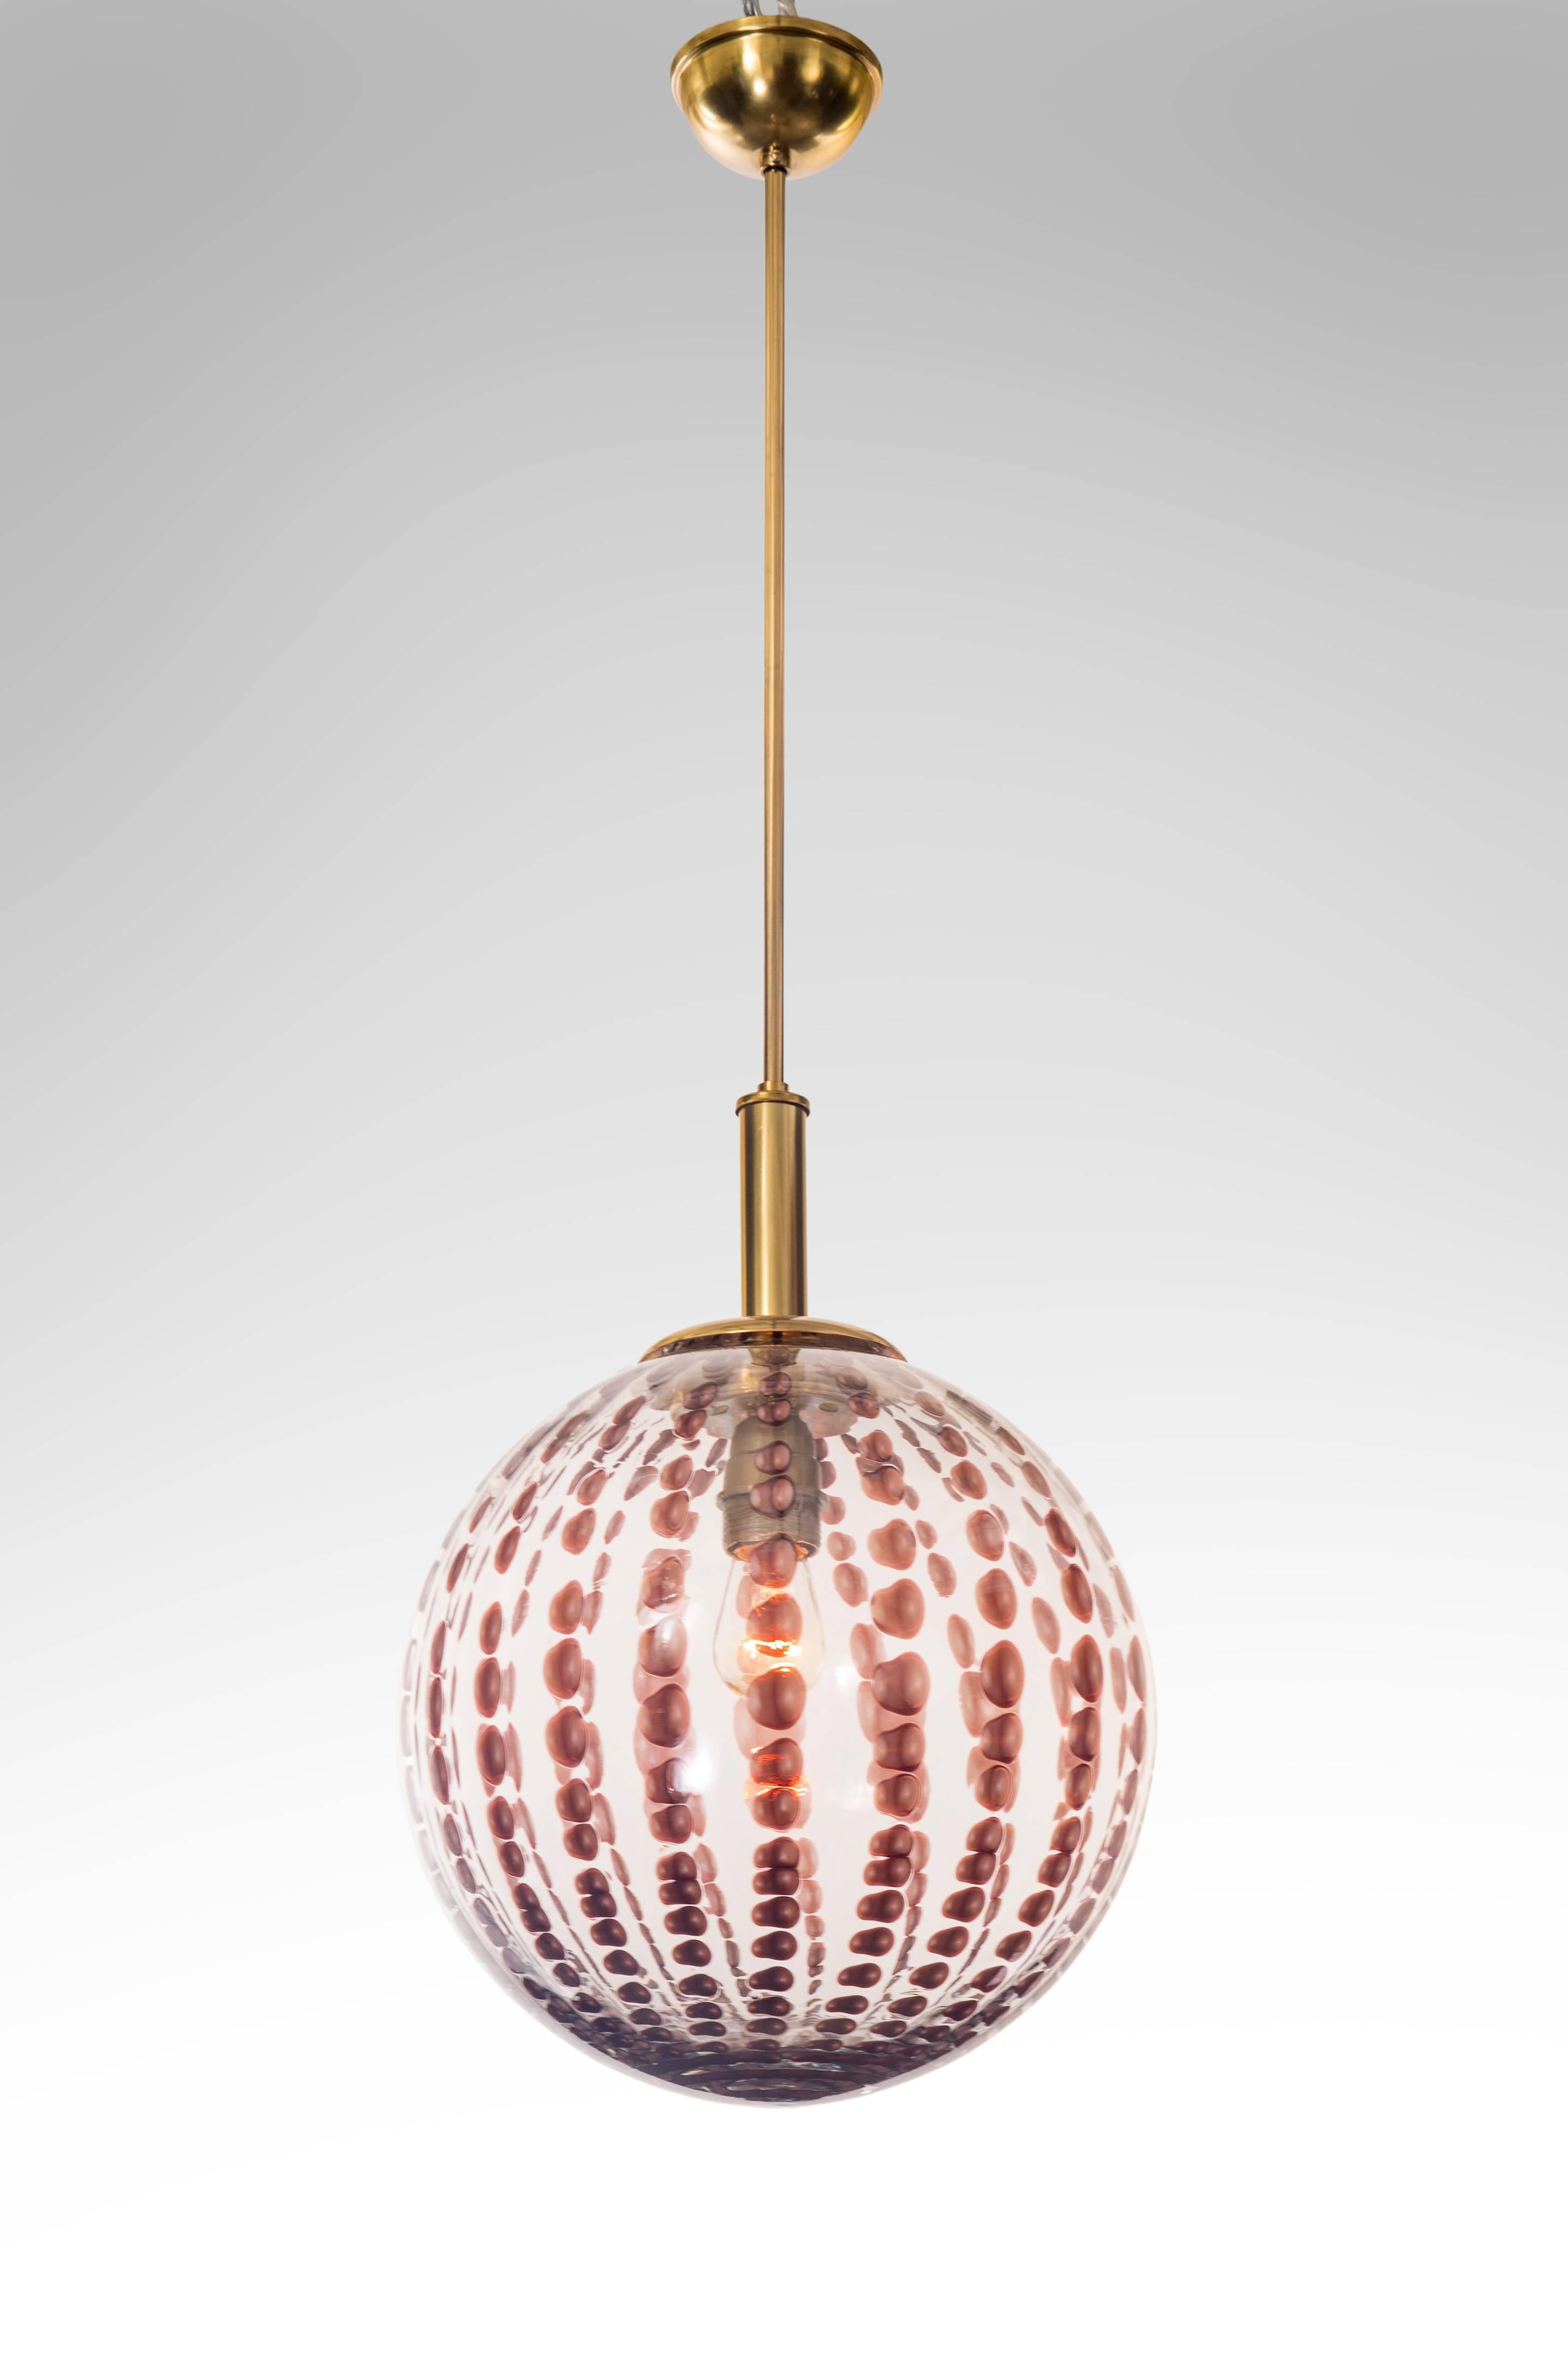 Very attractive colorless and amethyst glass globe. The brass fixture, supporting a spherical glass diffuser adorned in amethyst colored murrine glass inclusions, containing a single light holder.